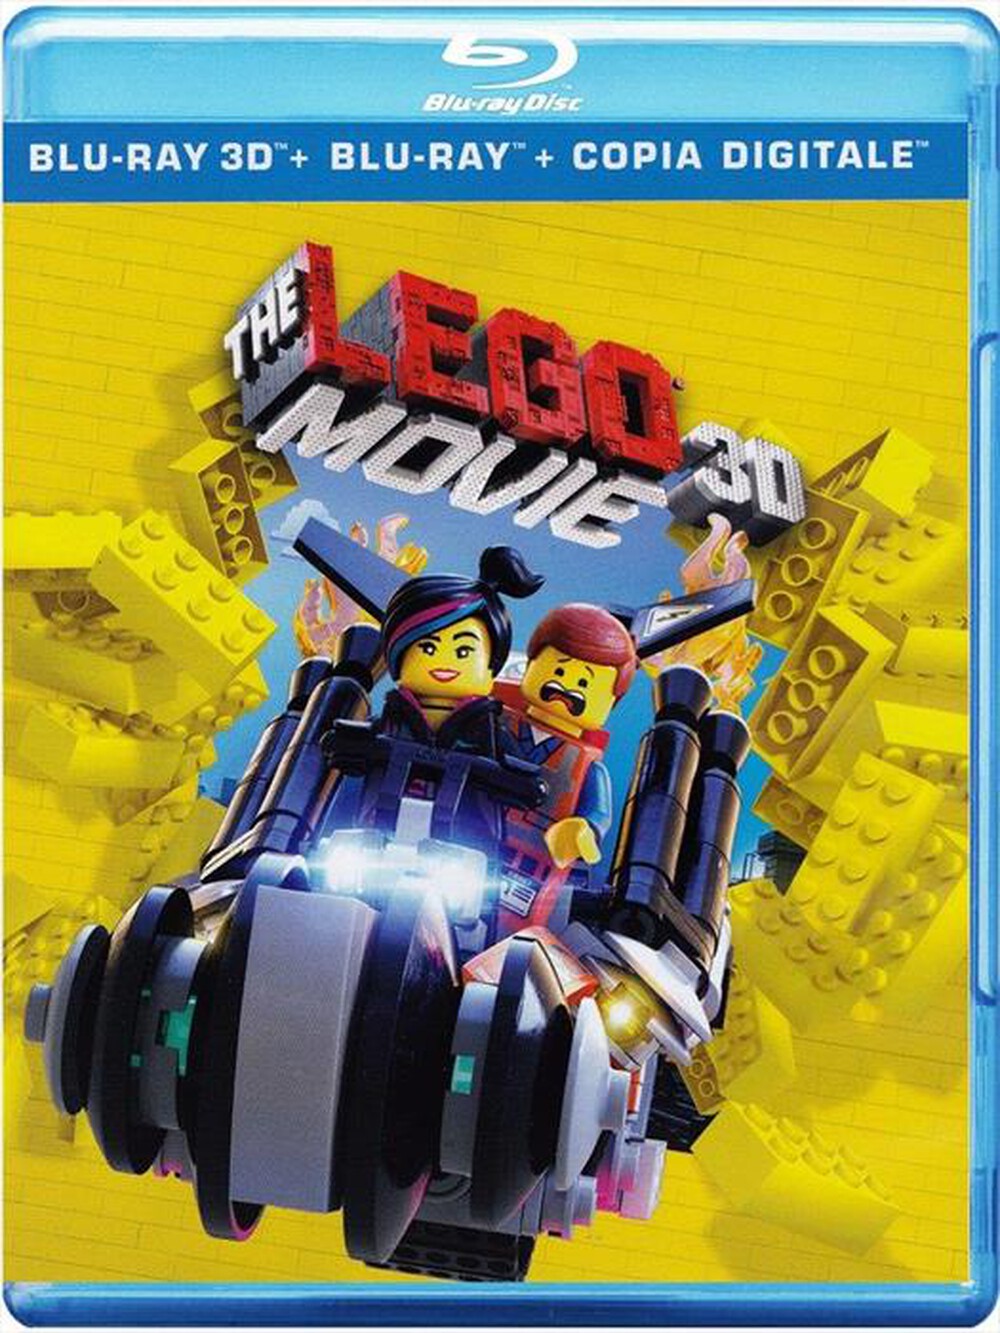 "WARNER HOME VIDEO - Lego Movie (The) (3D) (Blu-Ray 3D+Blu-Ray) - "